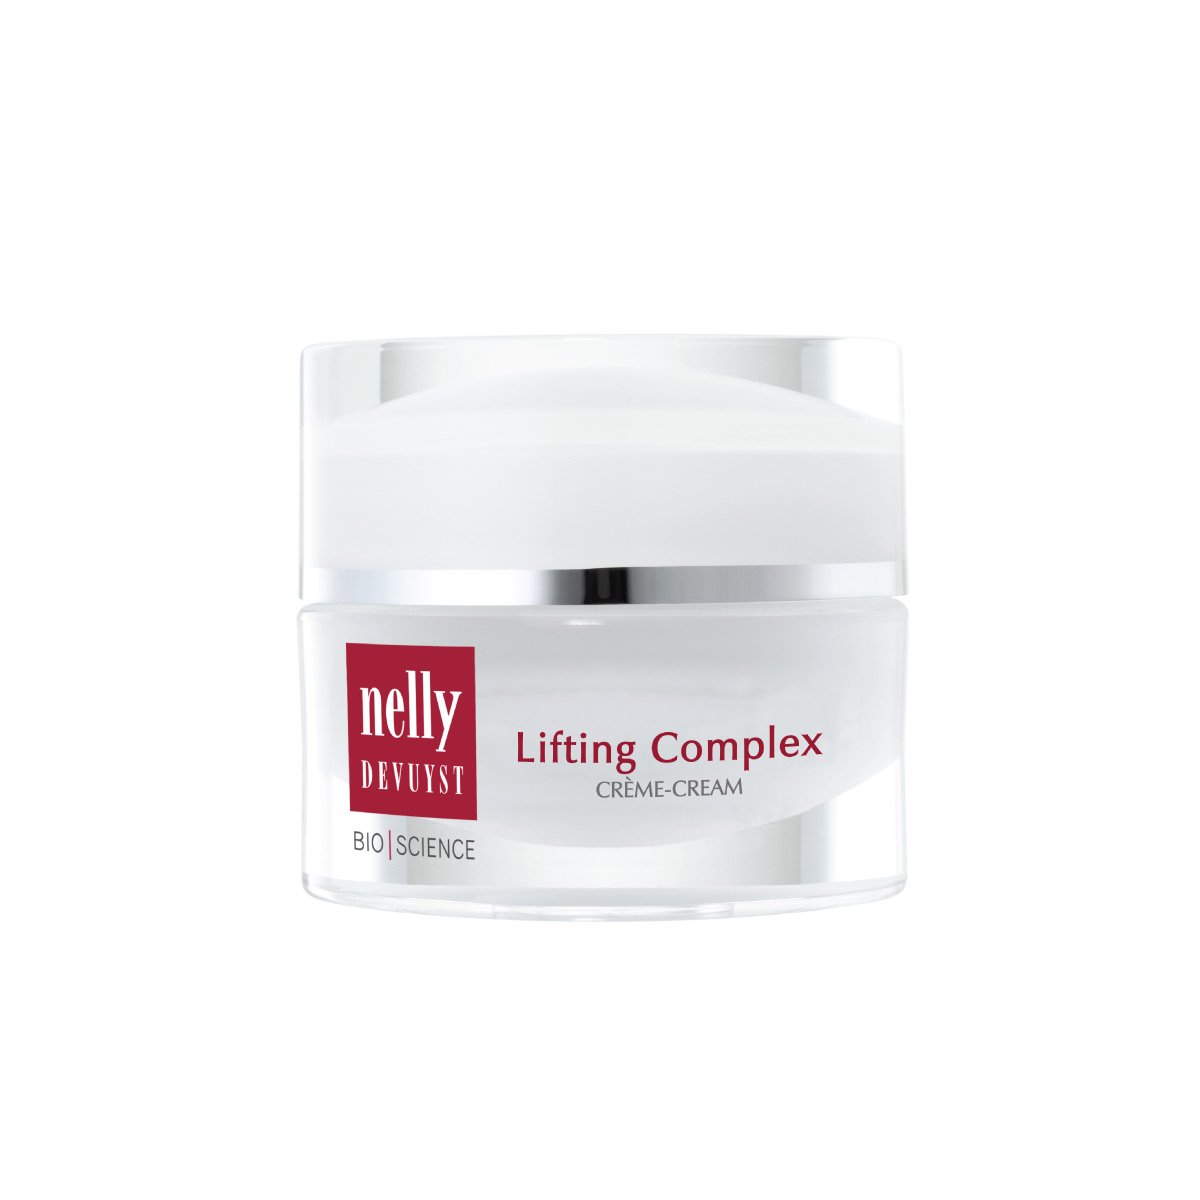 Crème Lifting Complex Bioscience - Nelly Devuyst